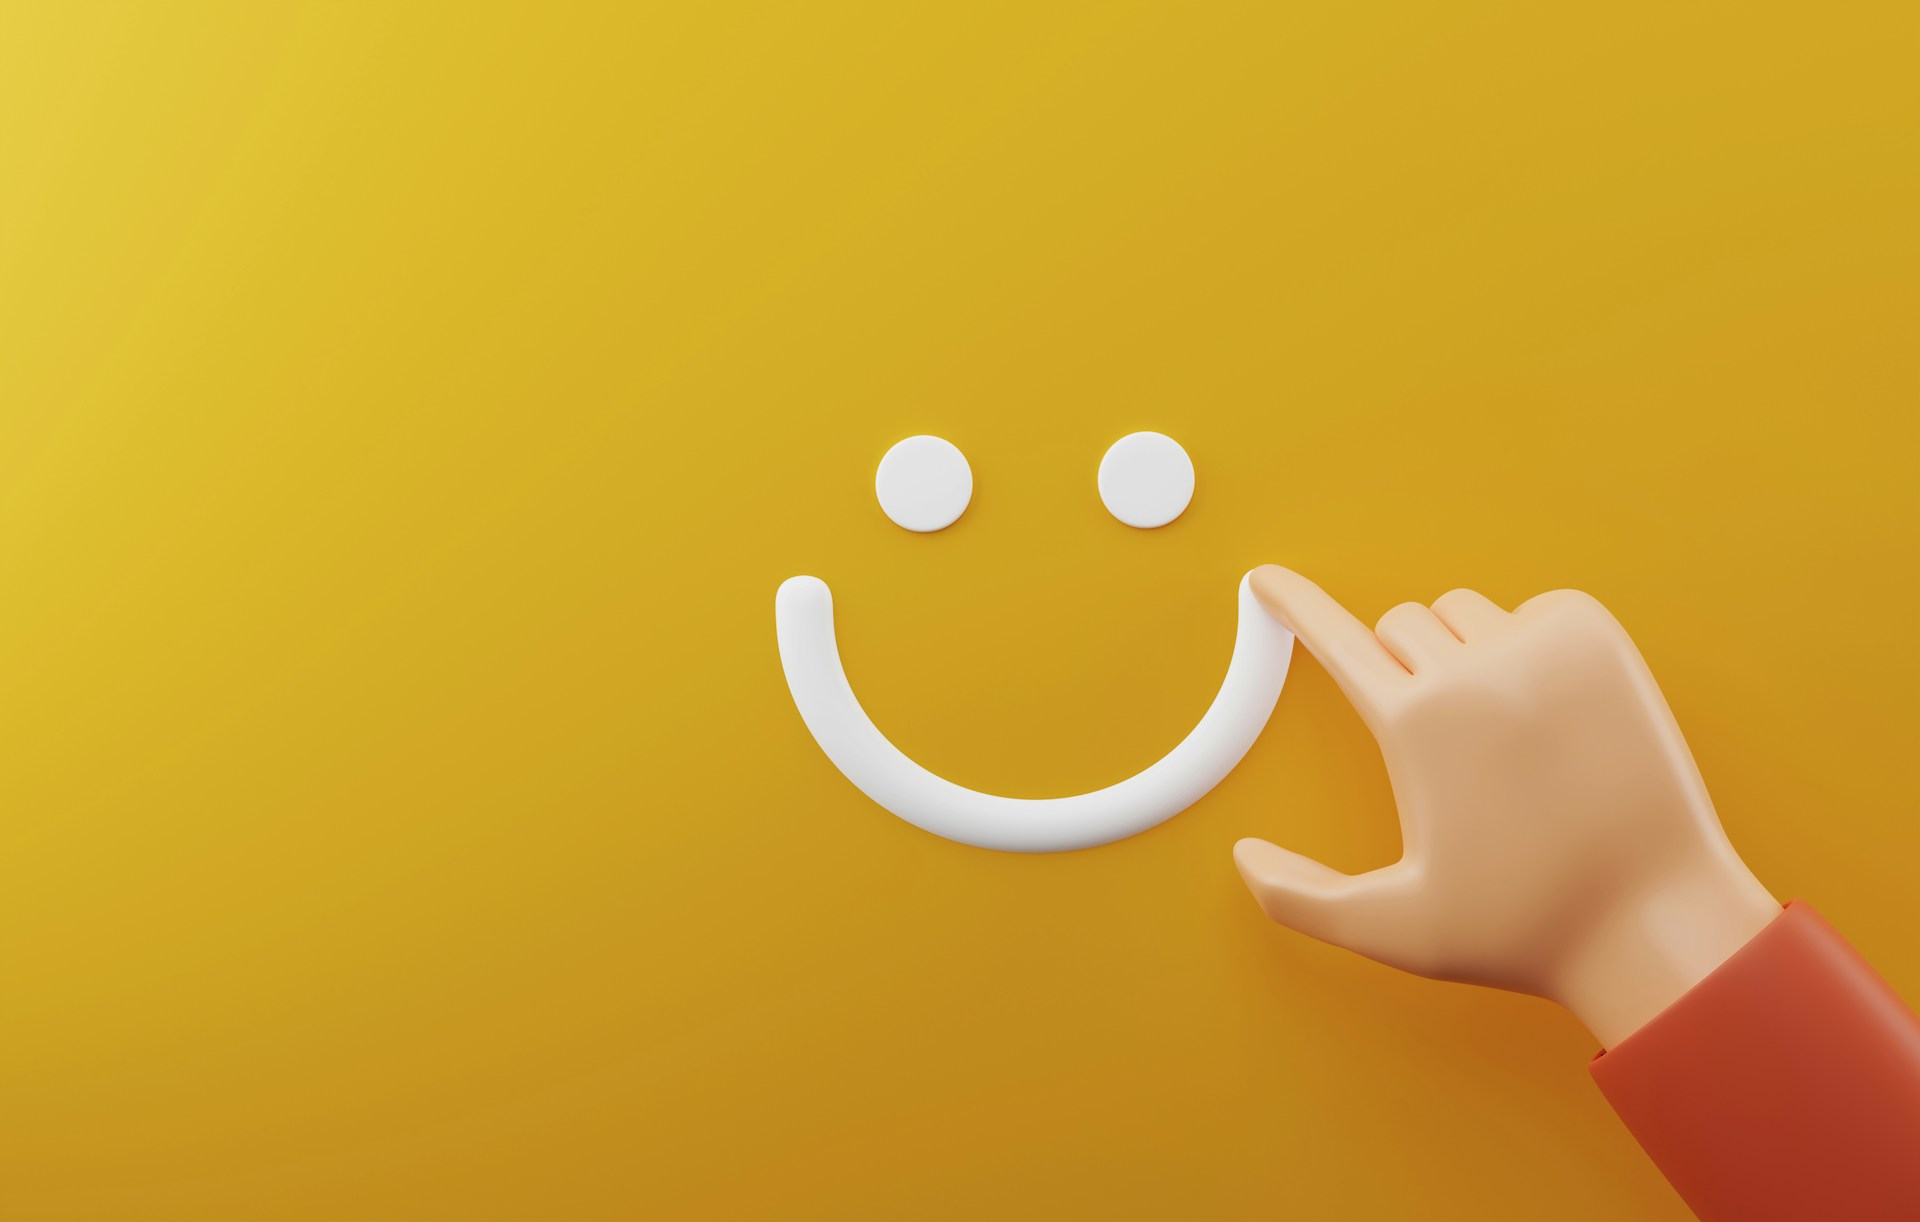 a hand drawing a smiley face on a yellow background